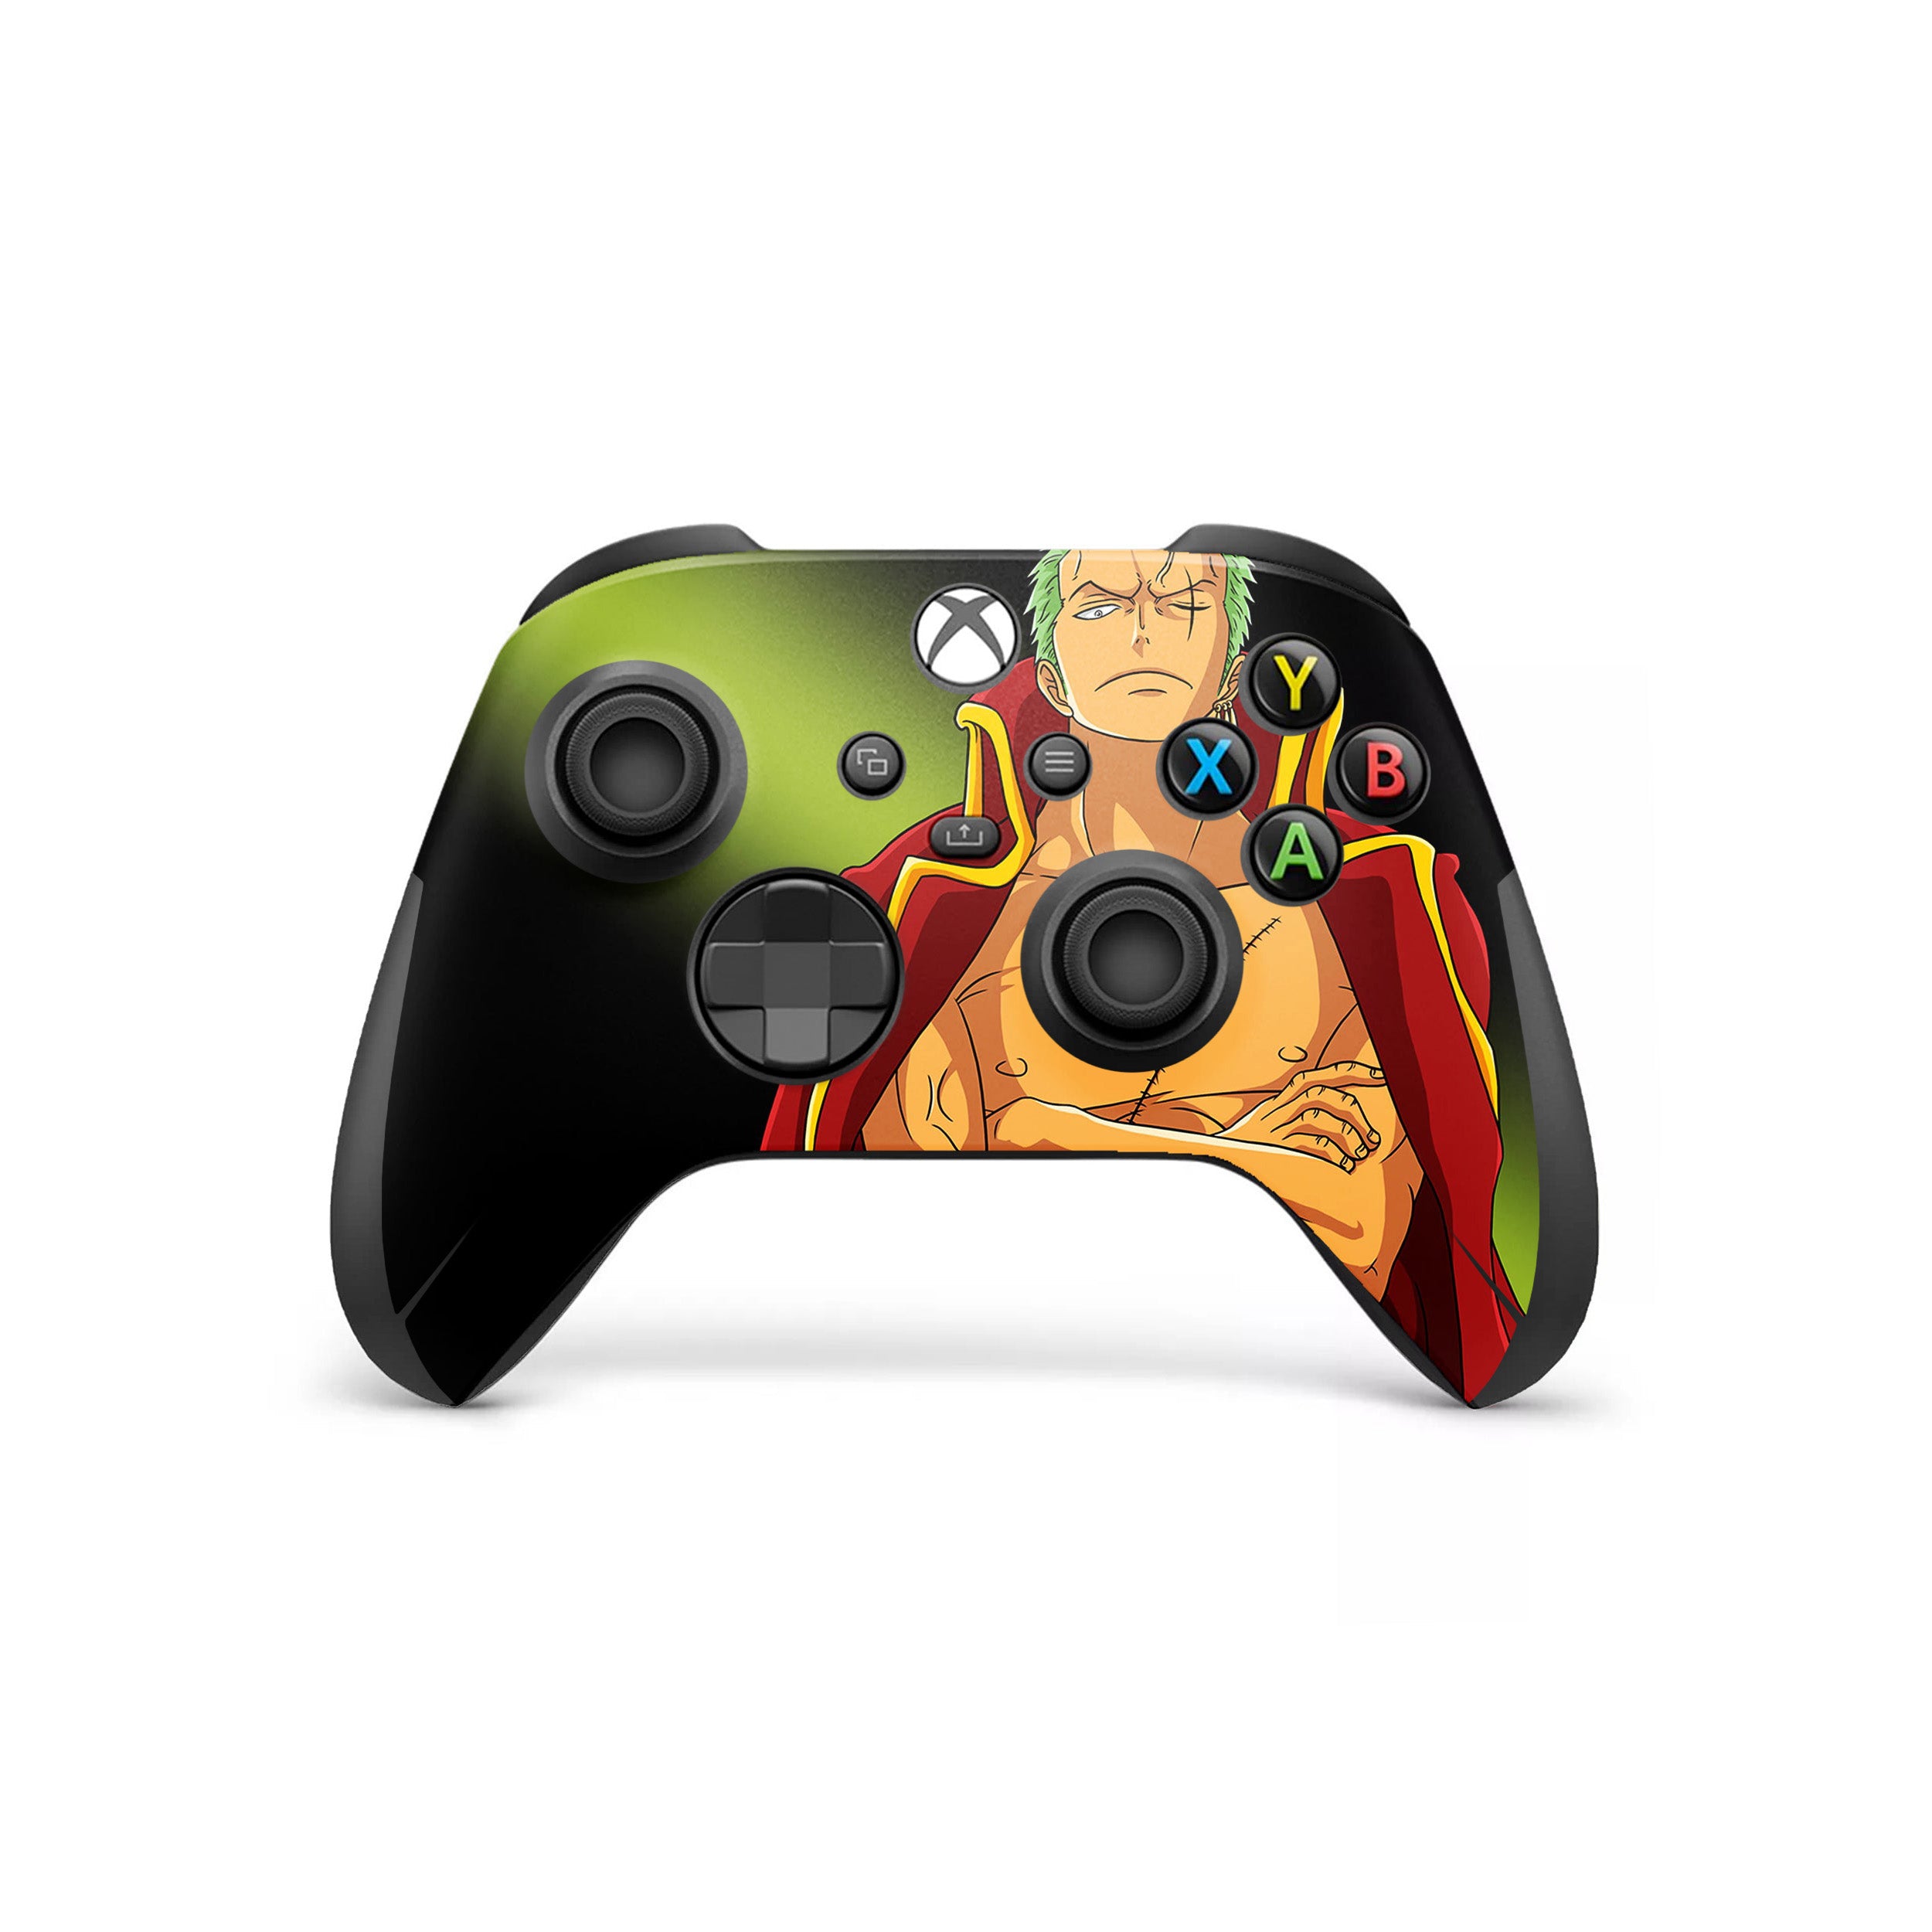 A video game skin featuring a One Piece Zoro Roronoa design for the Xbox Wireless Controller.